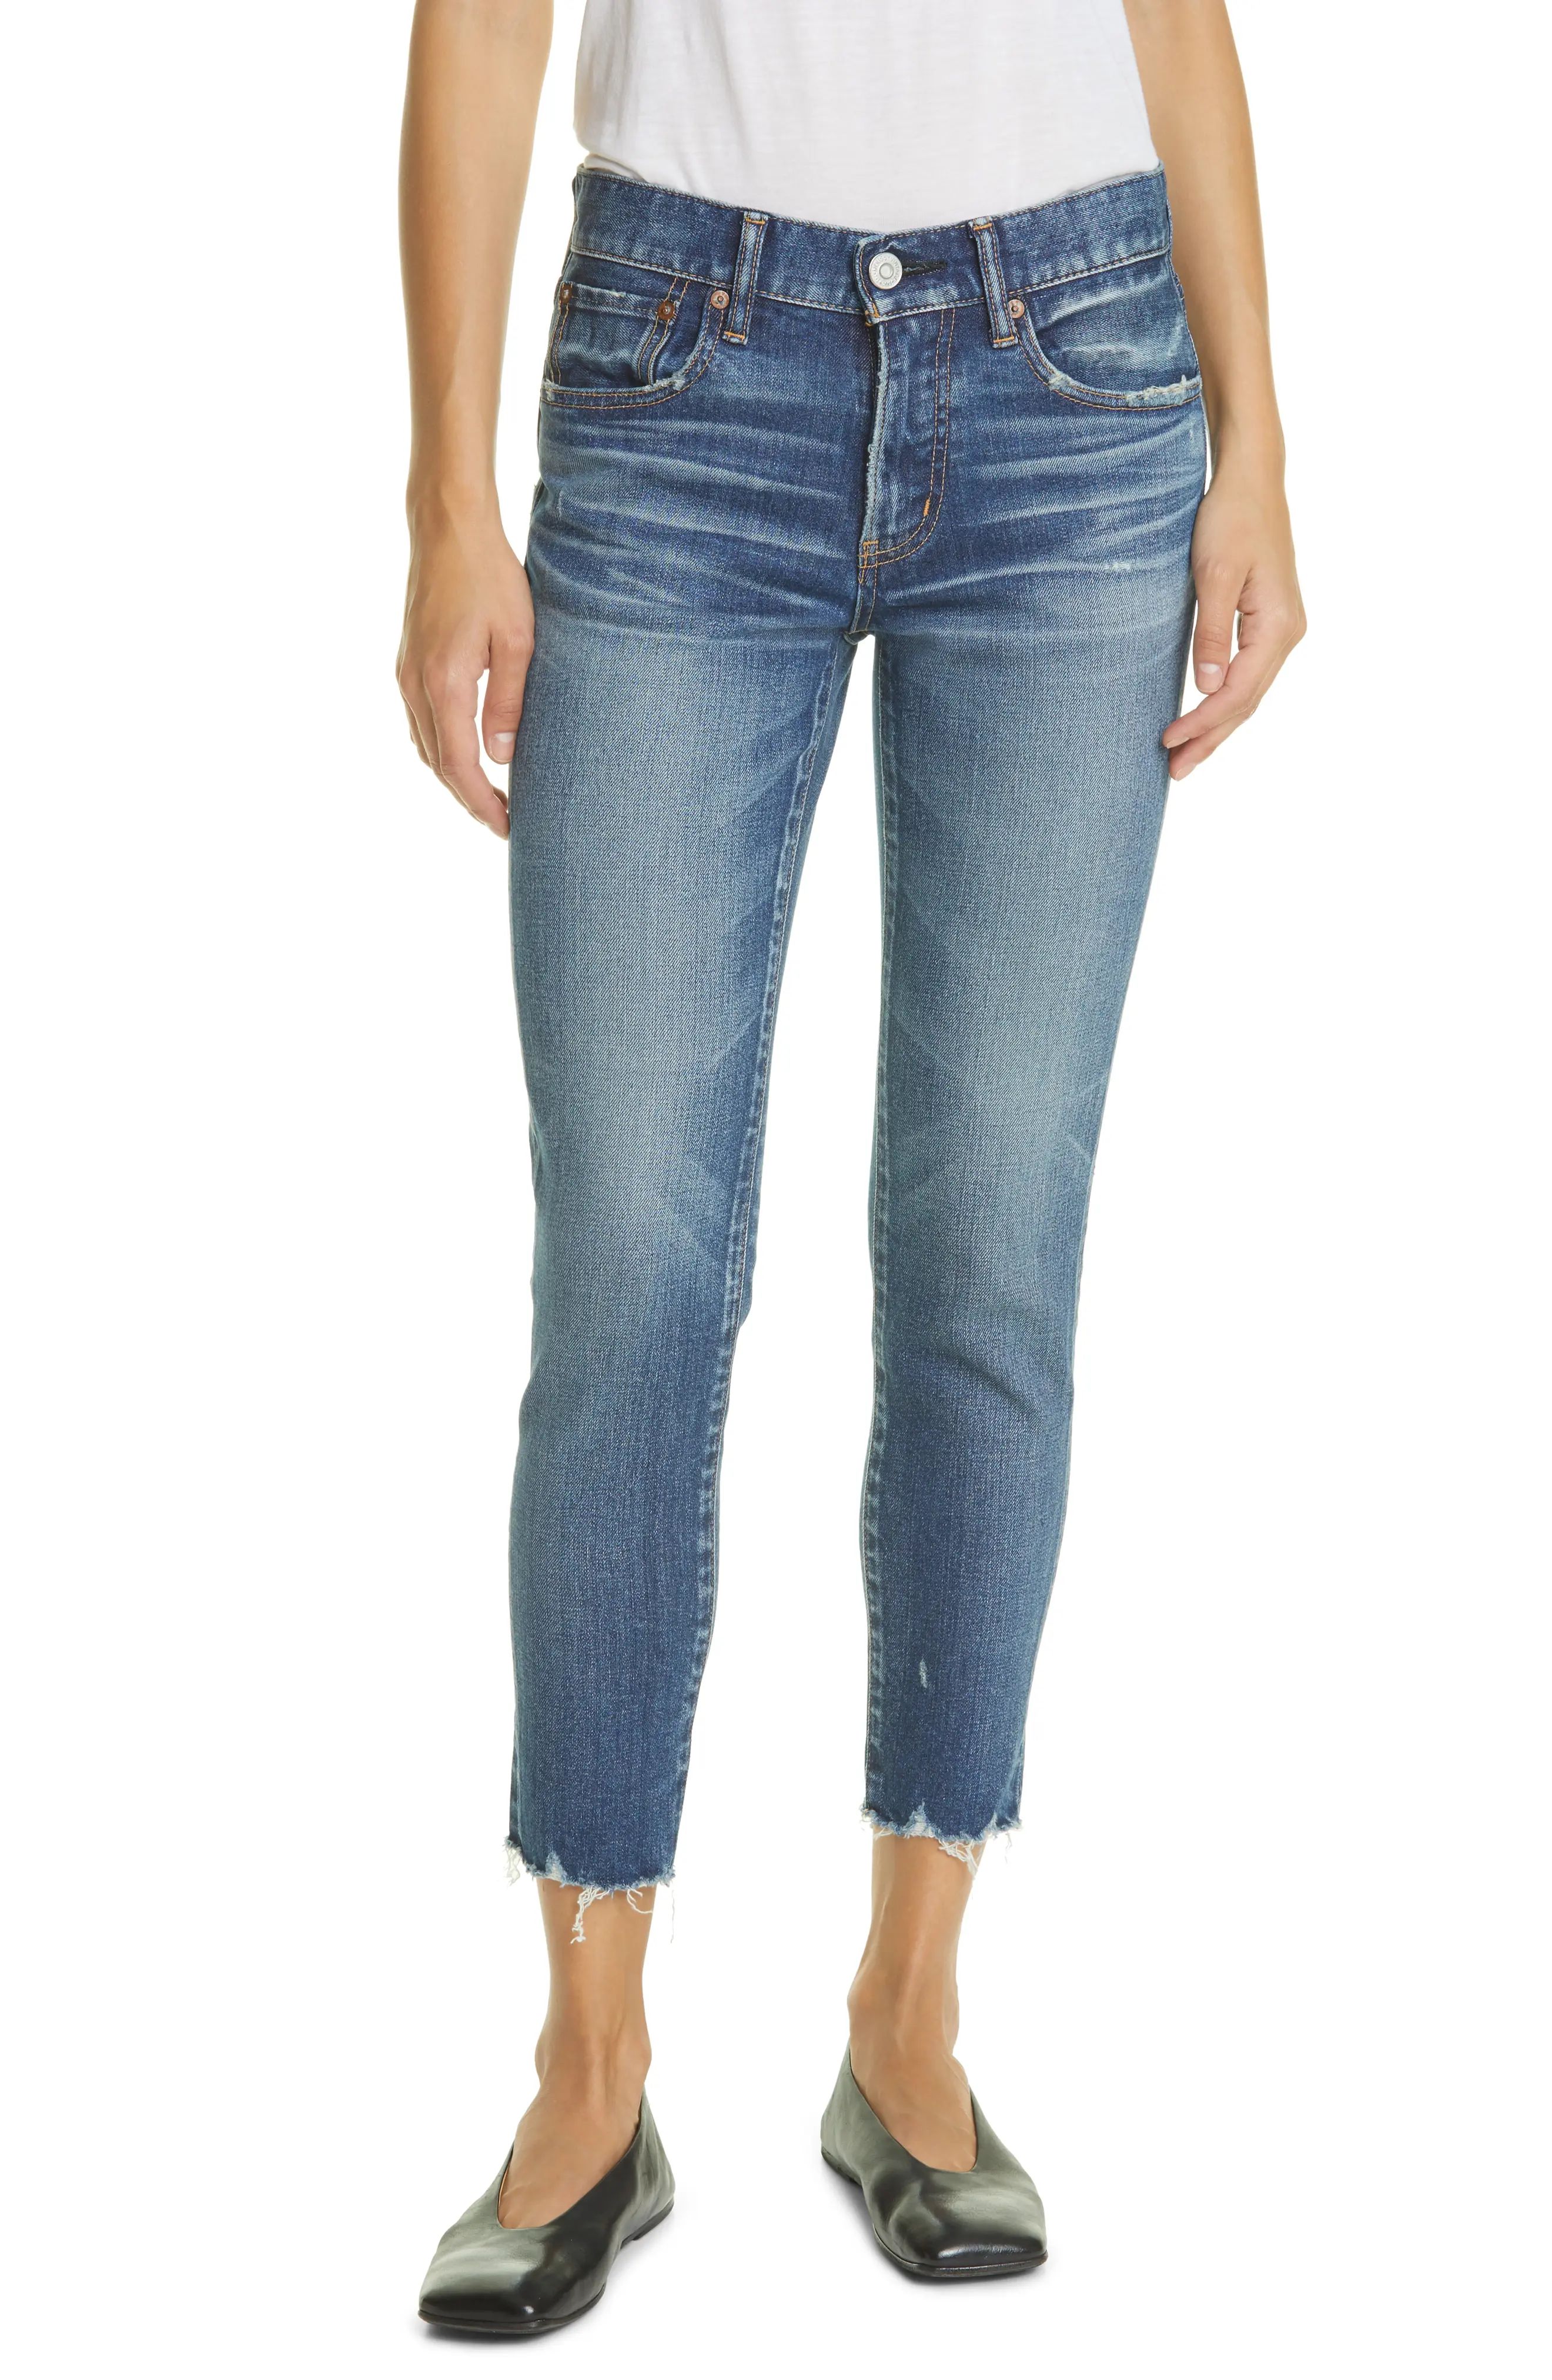 MOUSSY Tyrone Raw Hem Skinny Jeans in Blue at Nordstrom, Size 24 | Nordstrom